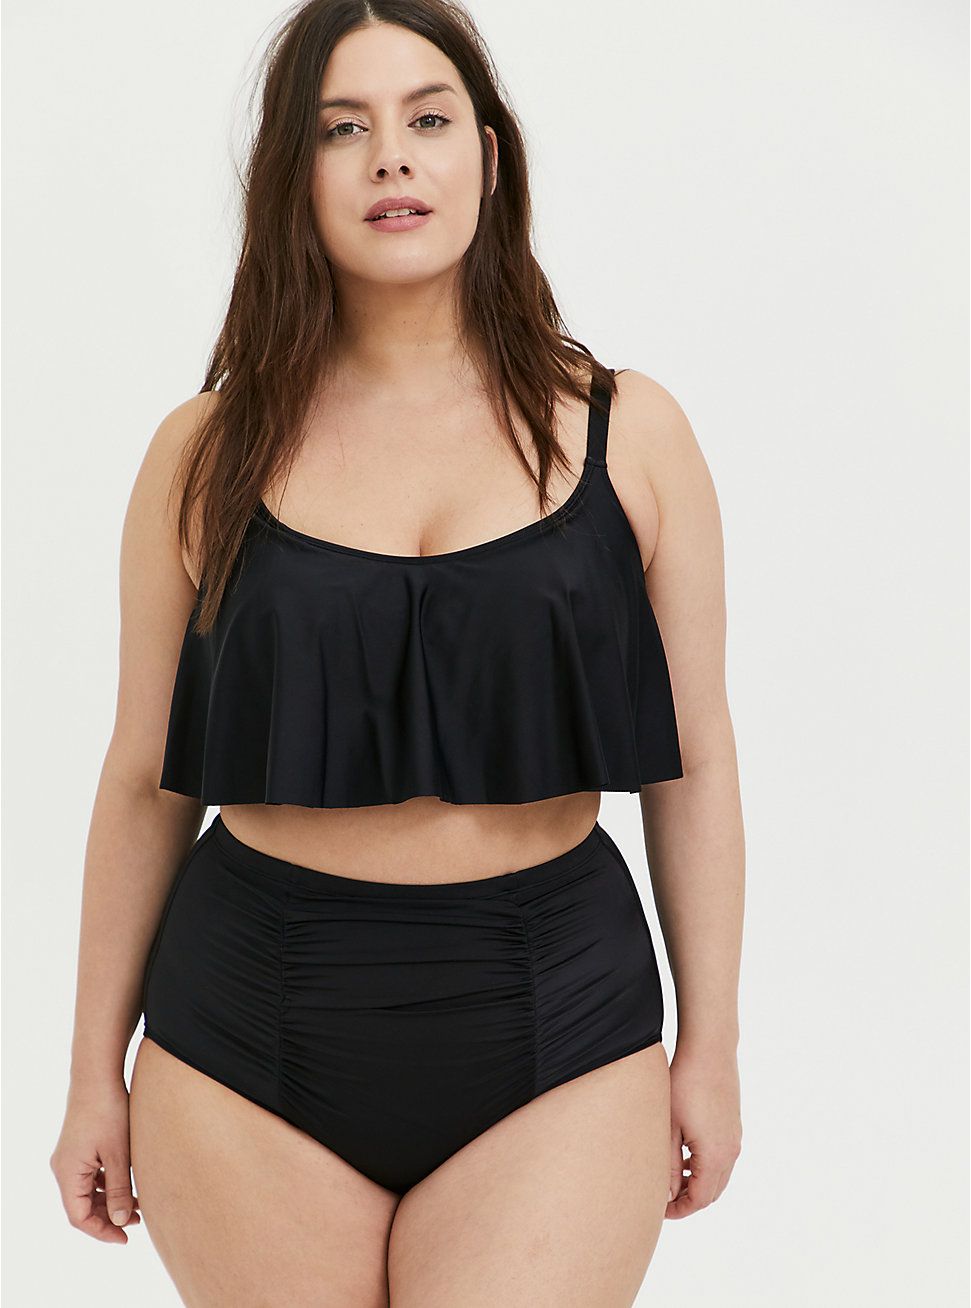 25 Best Swimsuits For Big Busts Summer 2021 - Swimwear